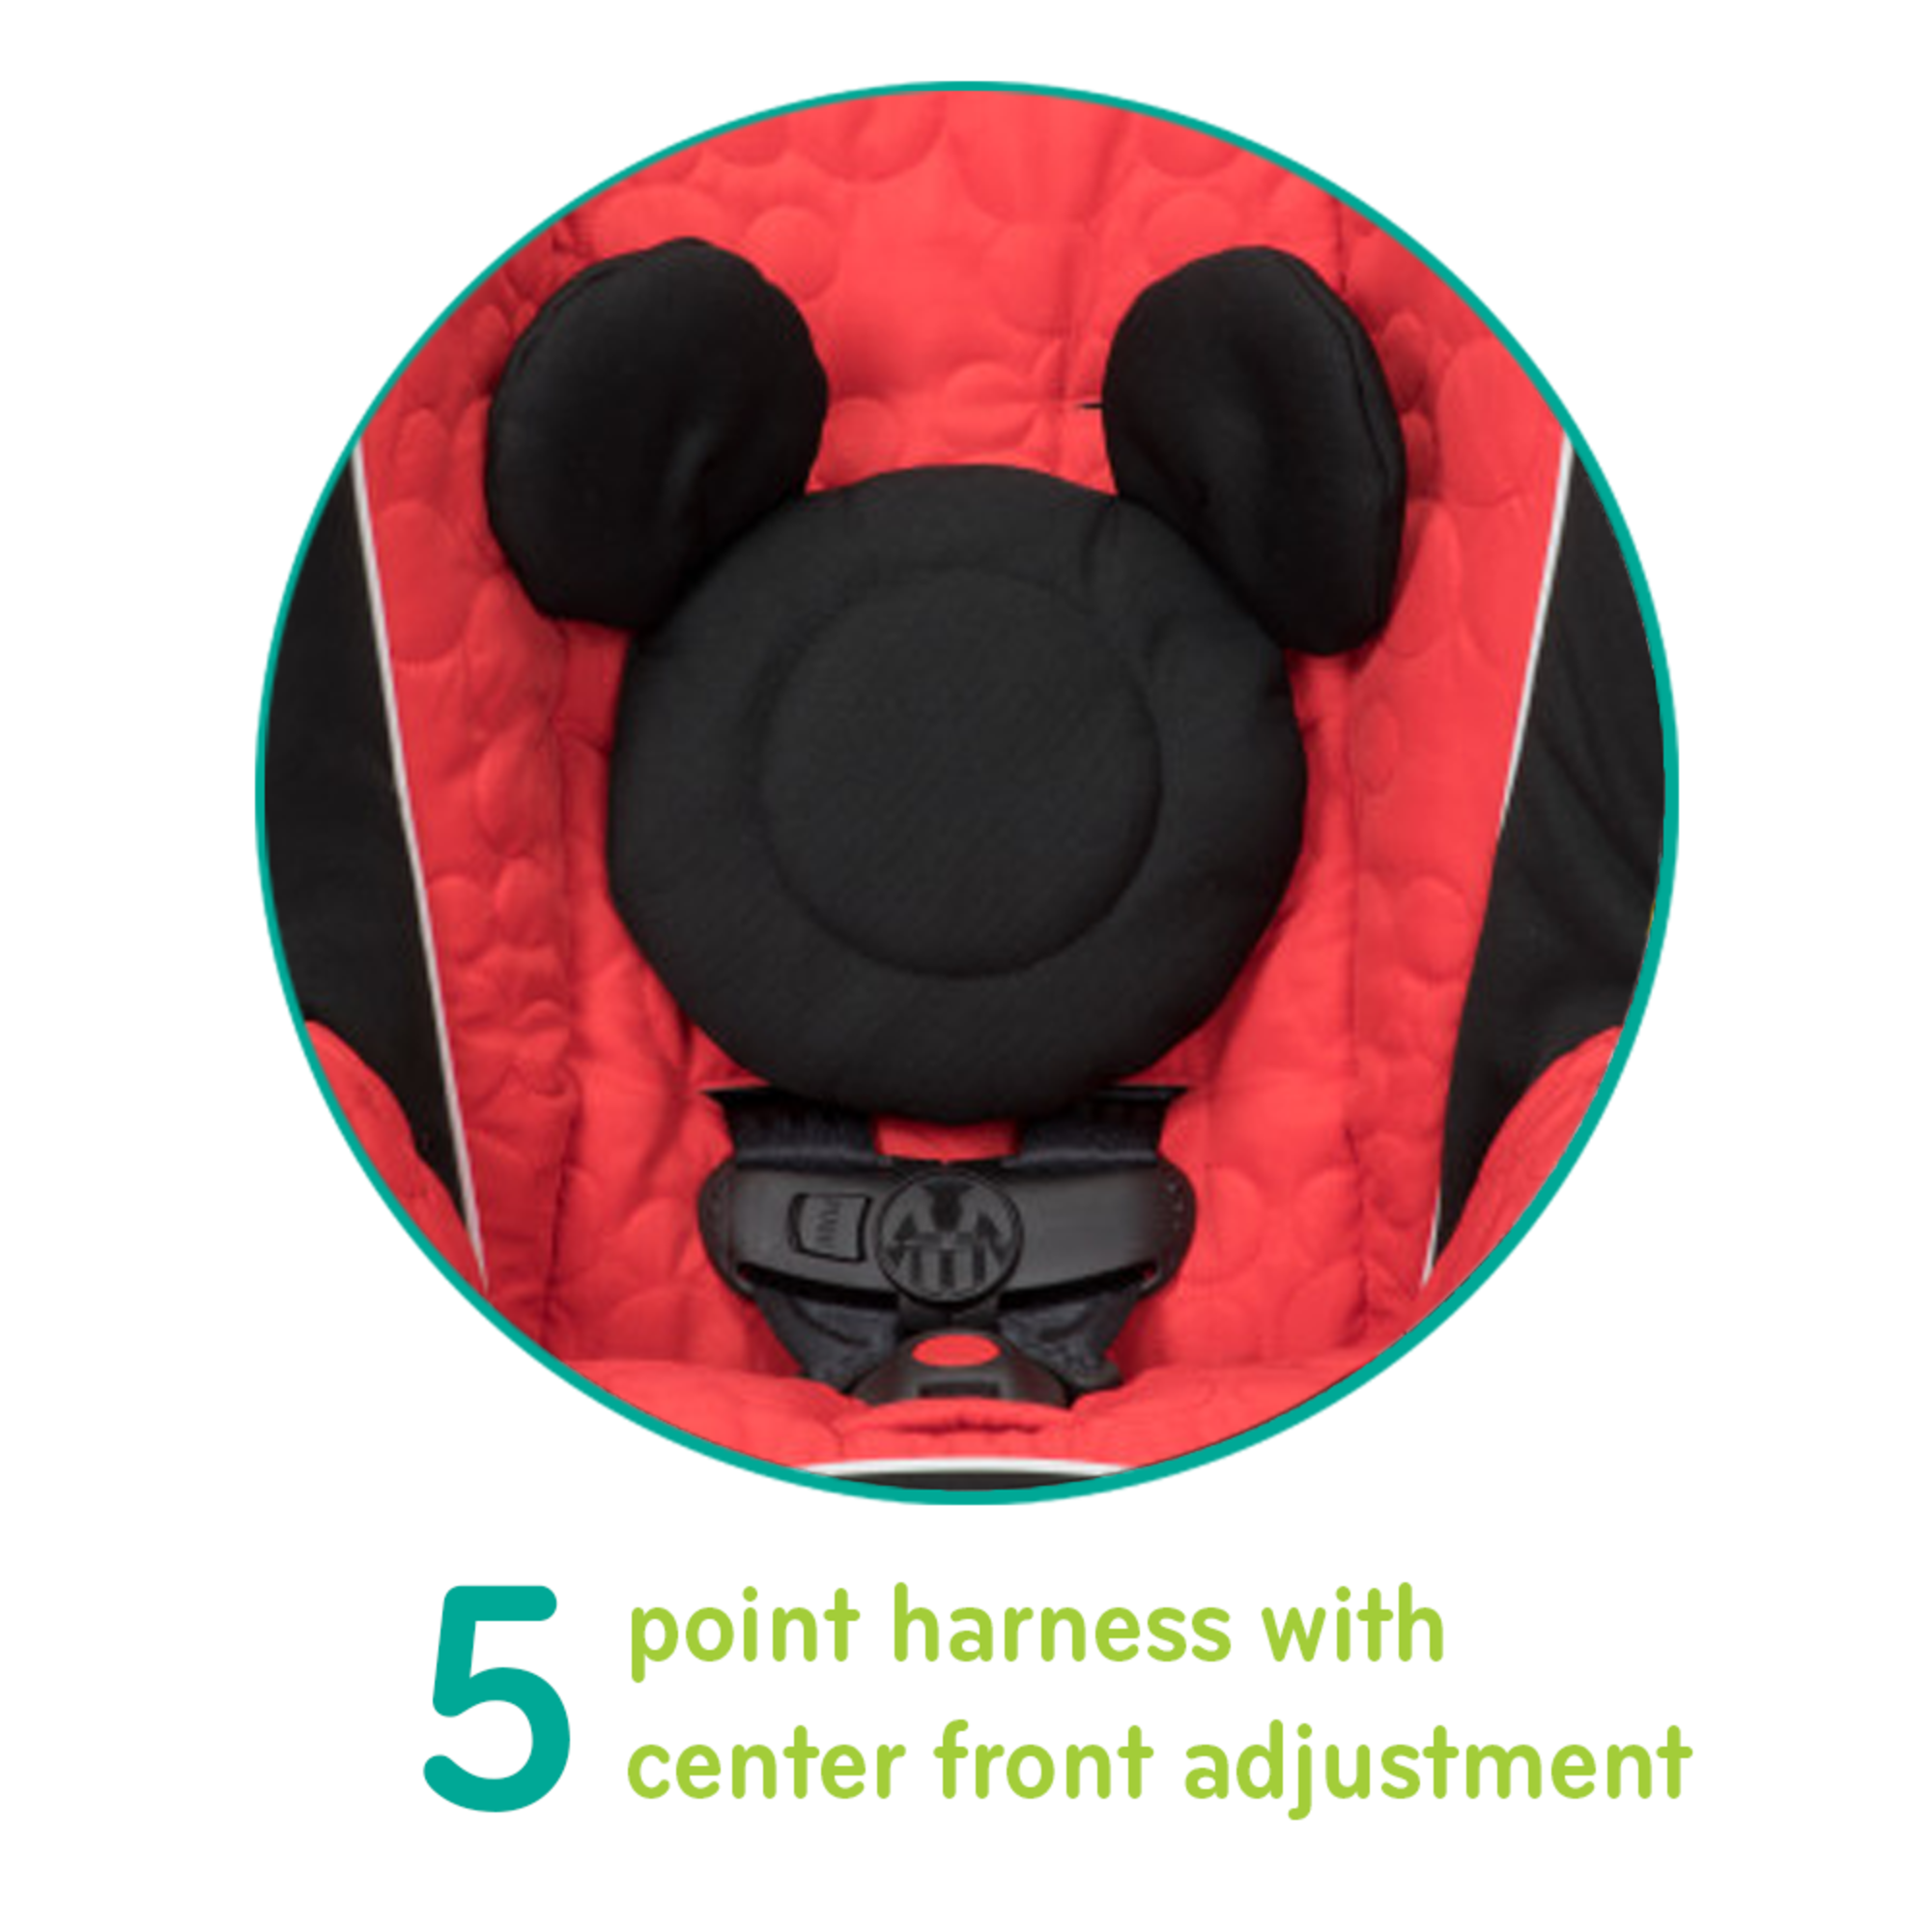 Disney Baby Onlook 2-in-1 Convertible Car Seat - 5 point harness with center front adjustment